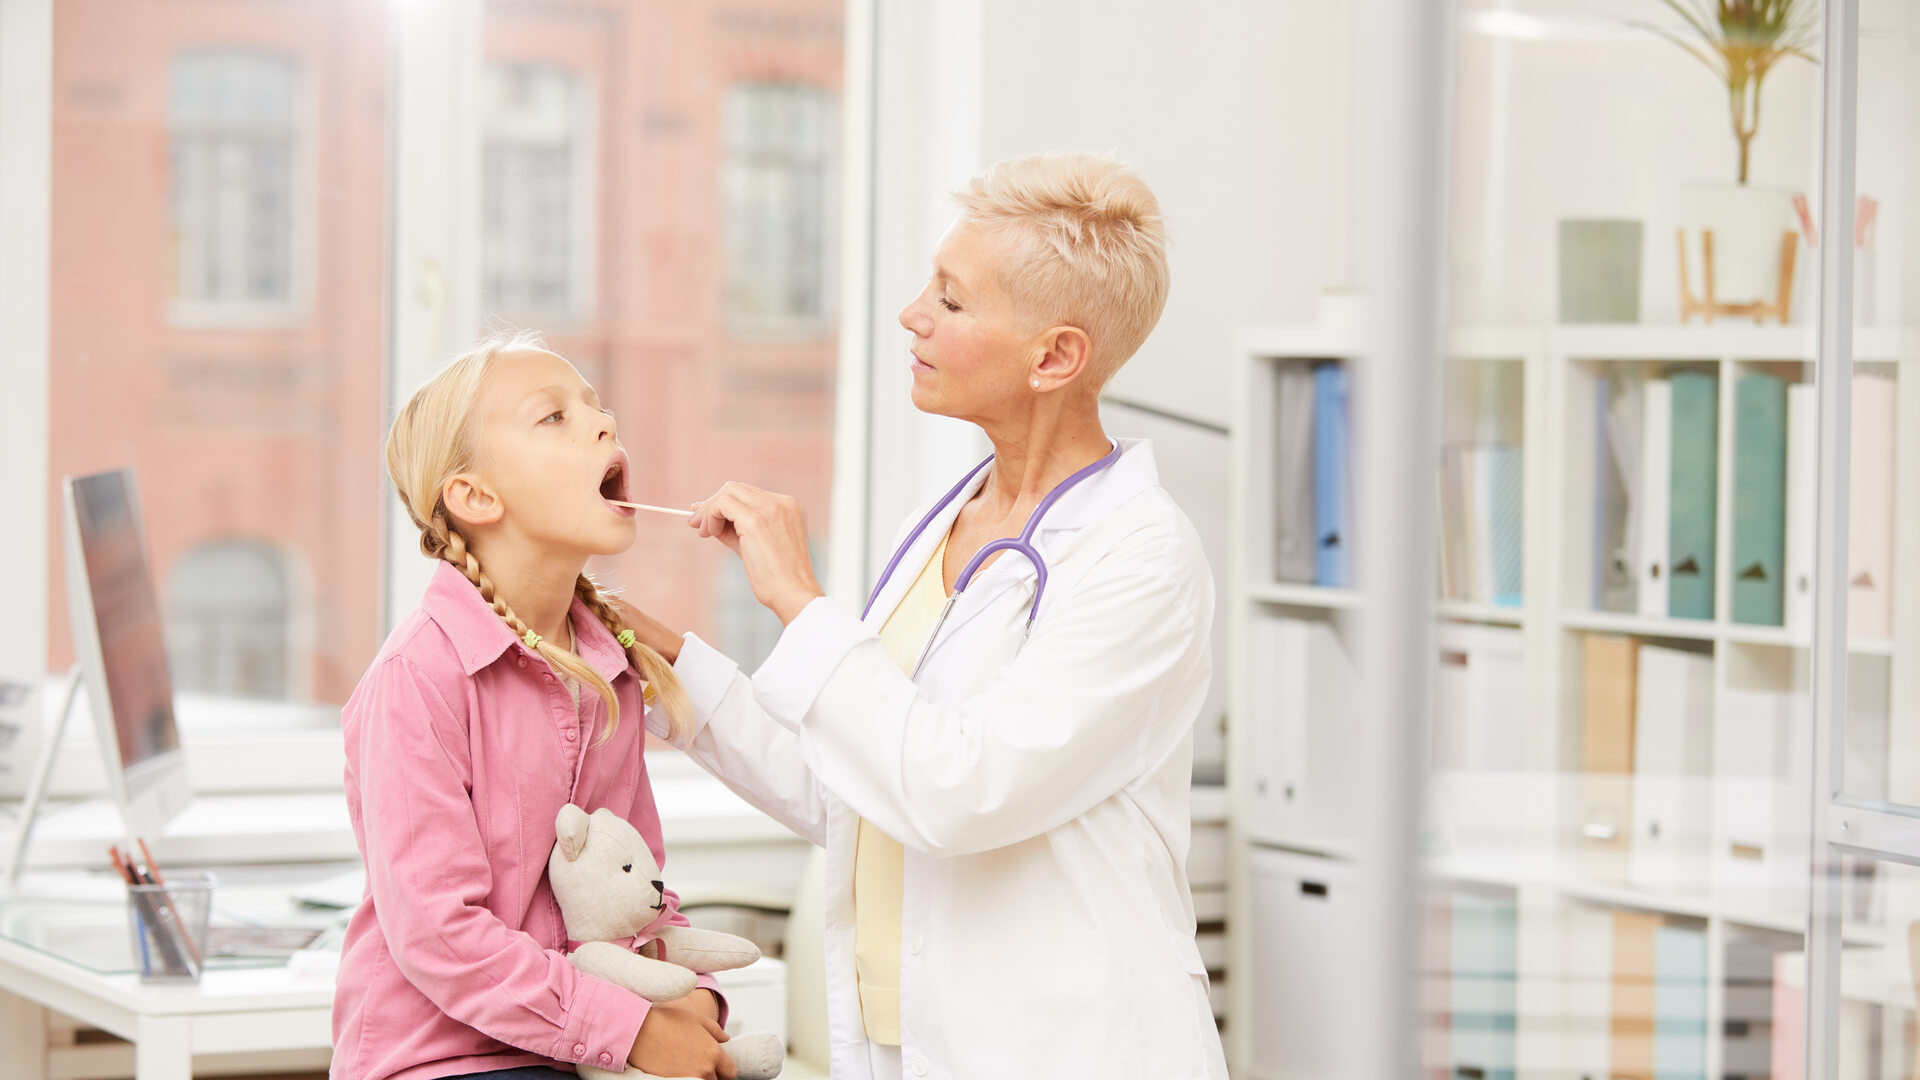 Pediatrician checking throat of youthful patient